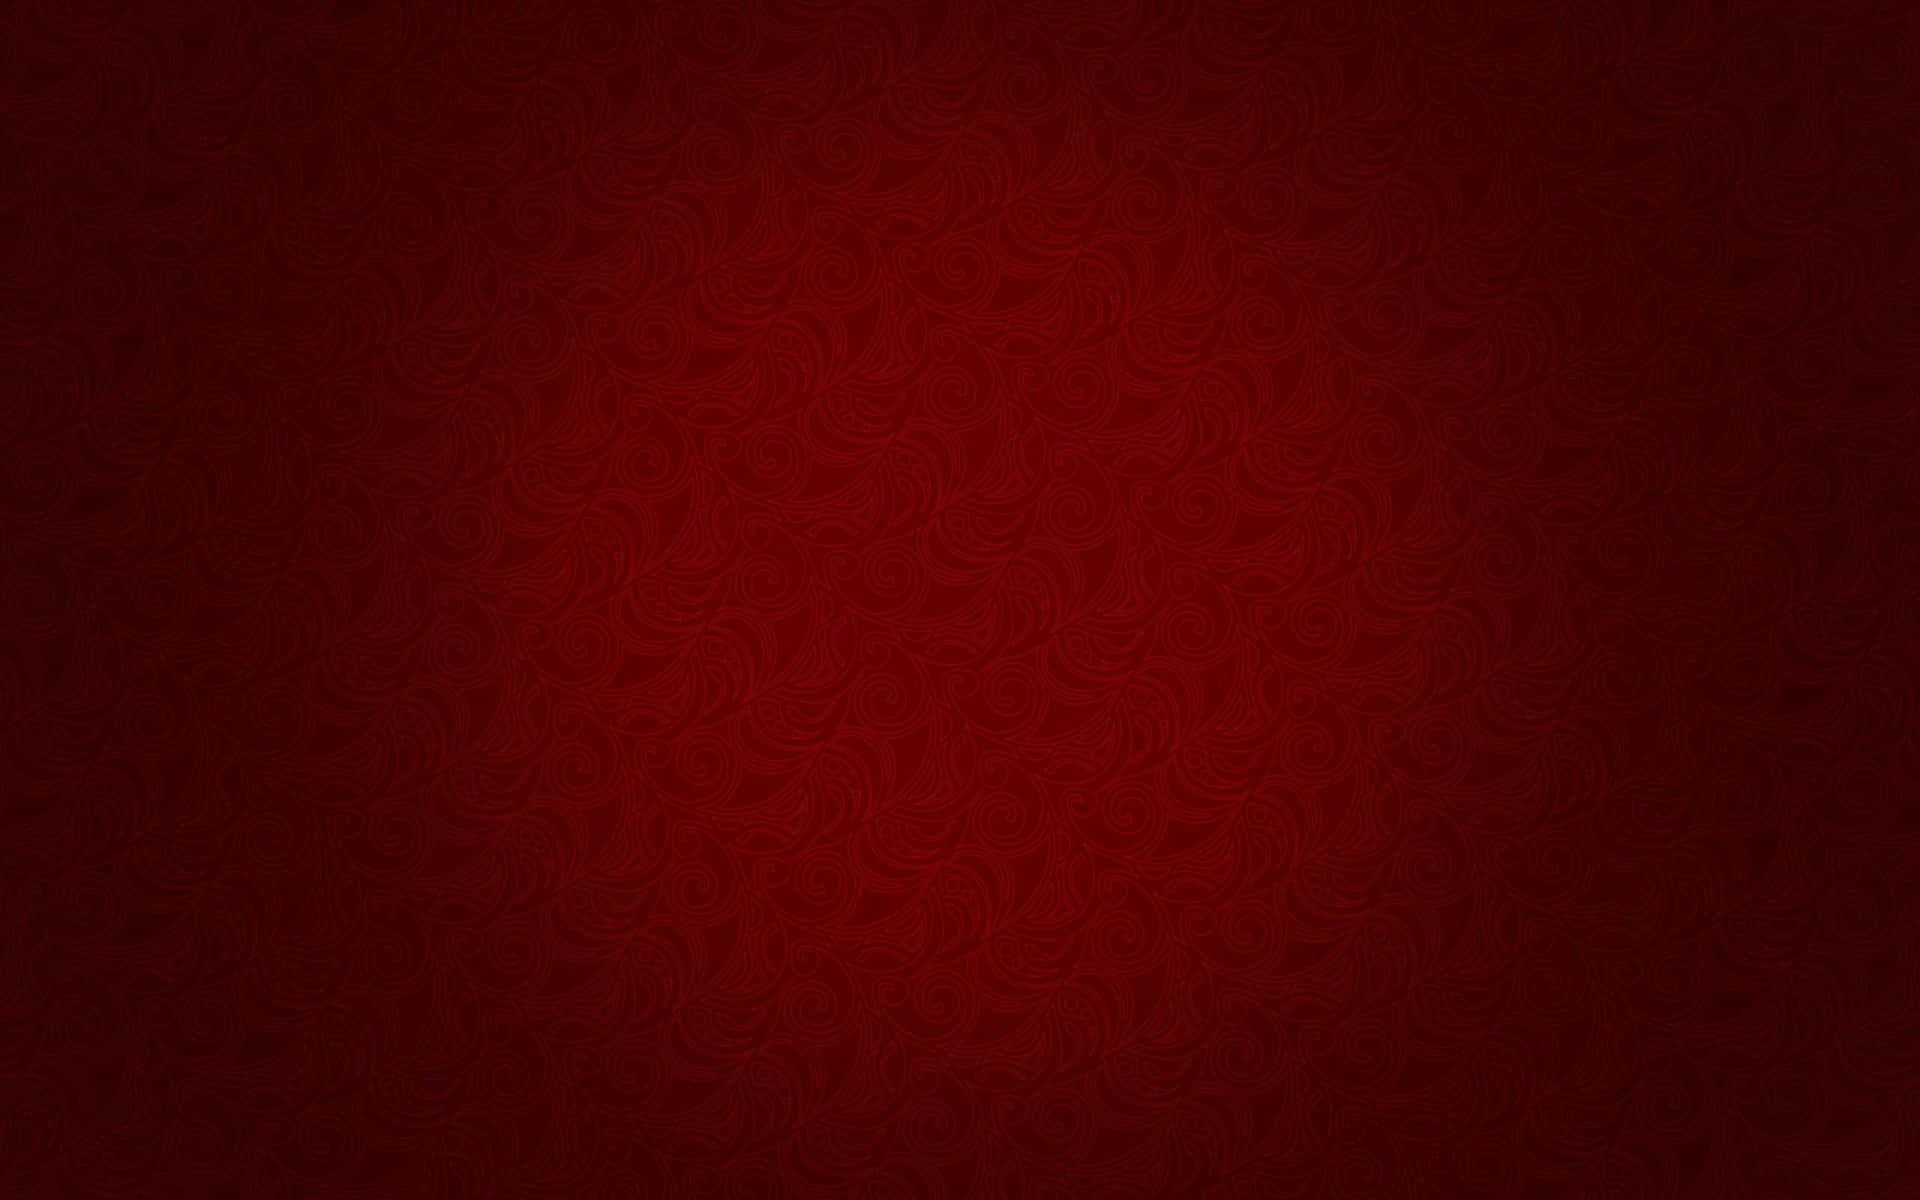 Vibrant Red High Resolution Backdrop